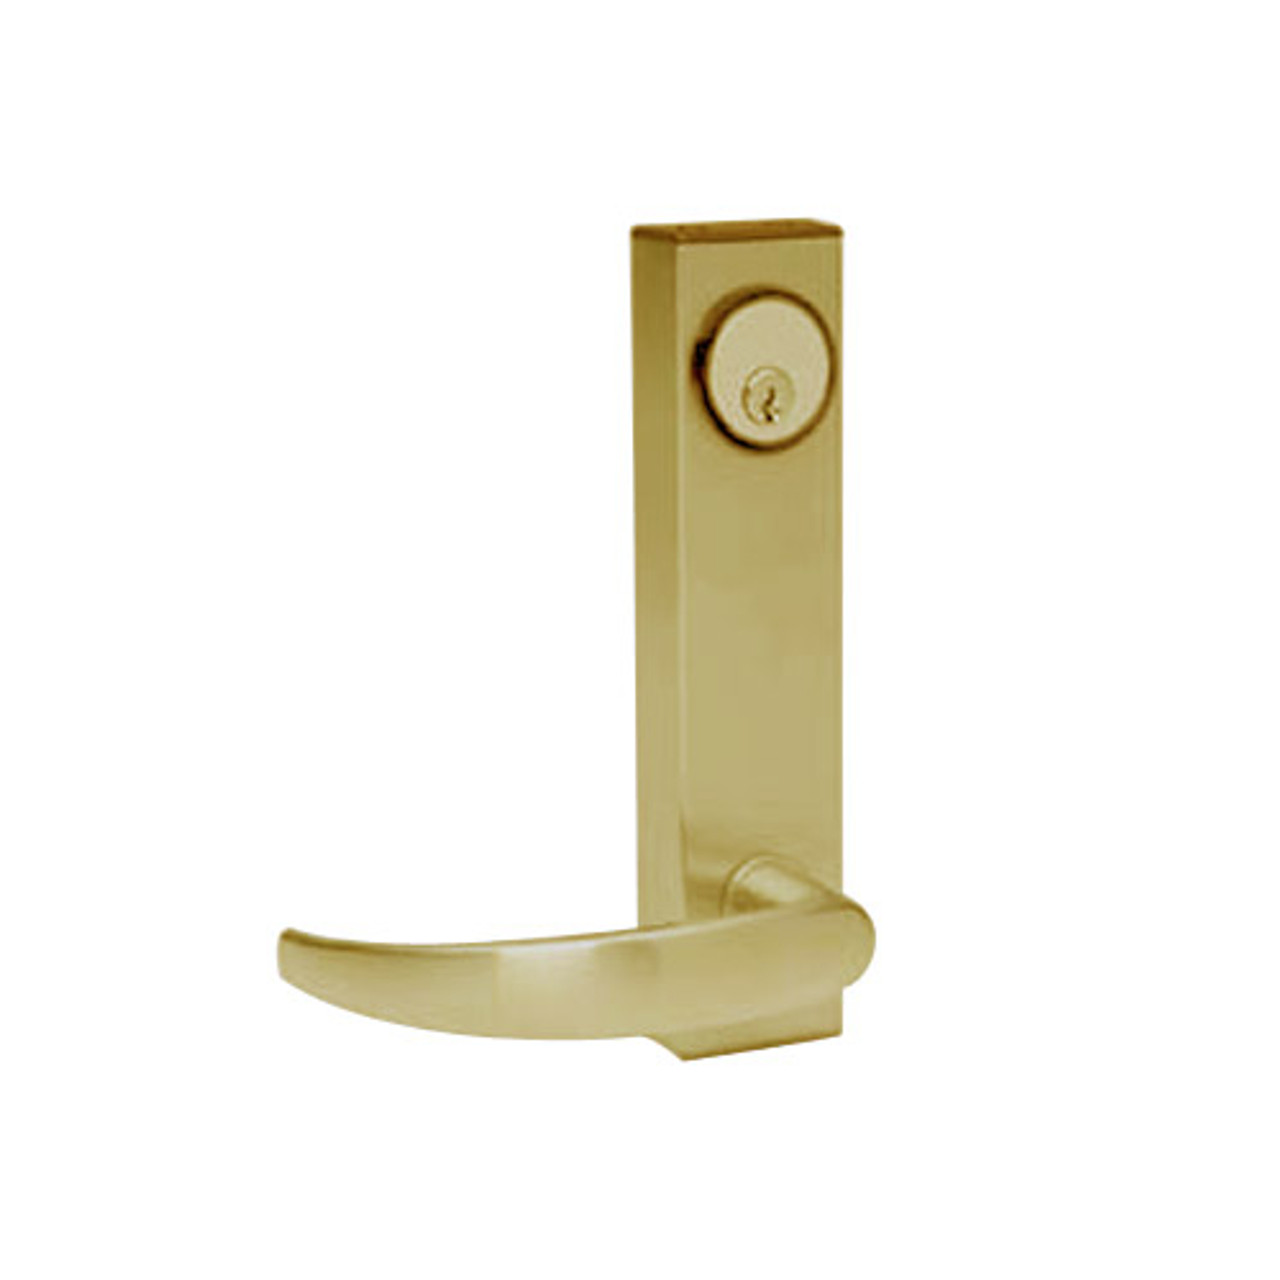 3080E-01-7-31-30 US4 Adams Rite Electrified Entry Trim with Curve Lever in Satin Brass Finish